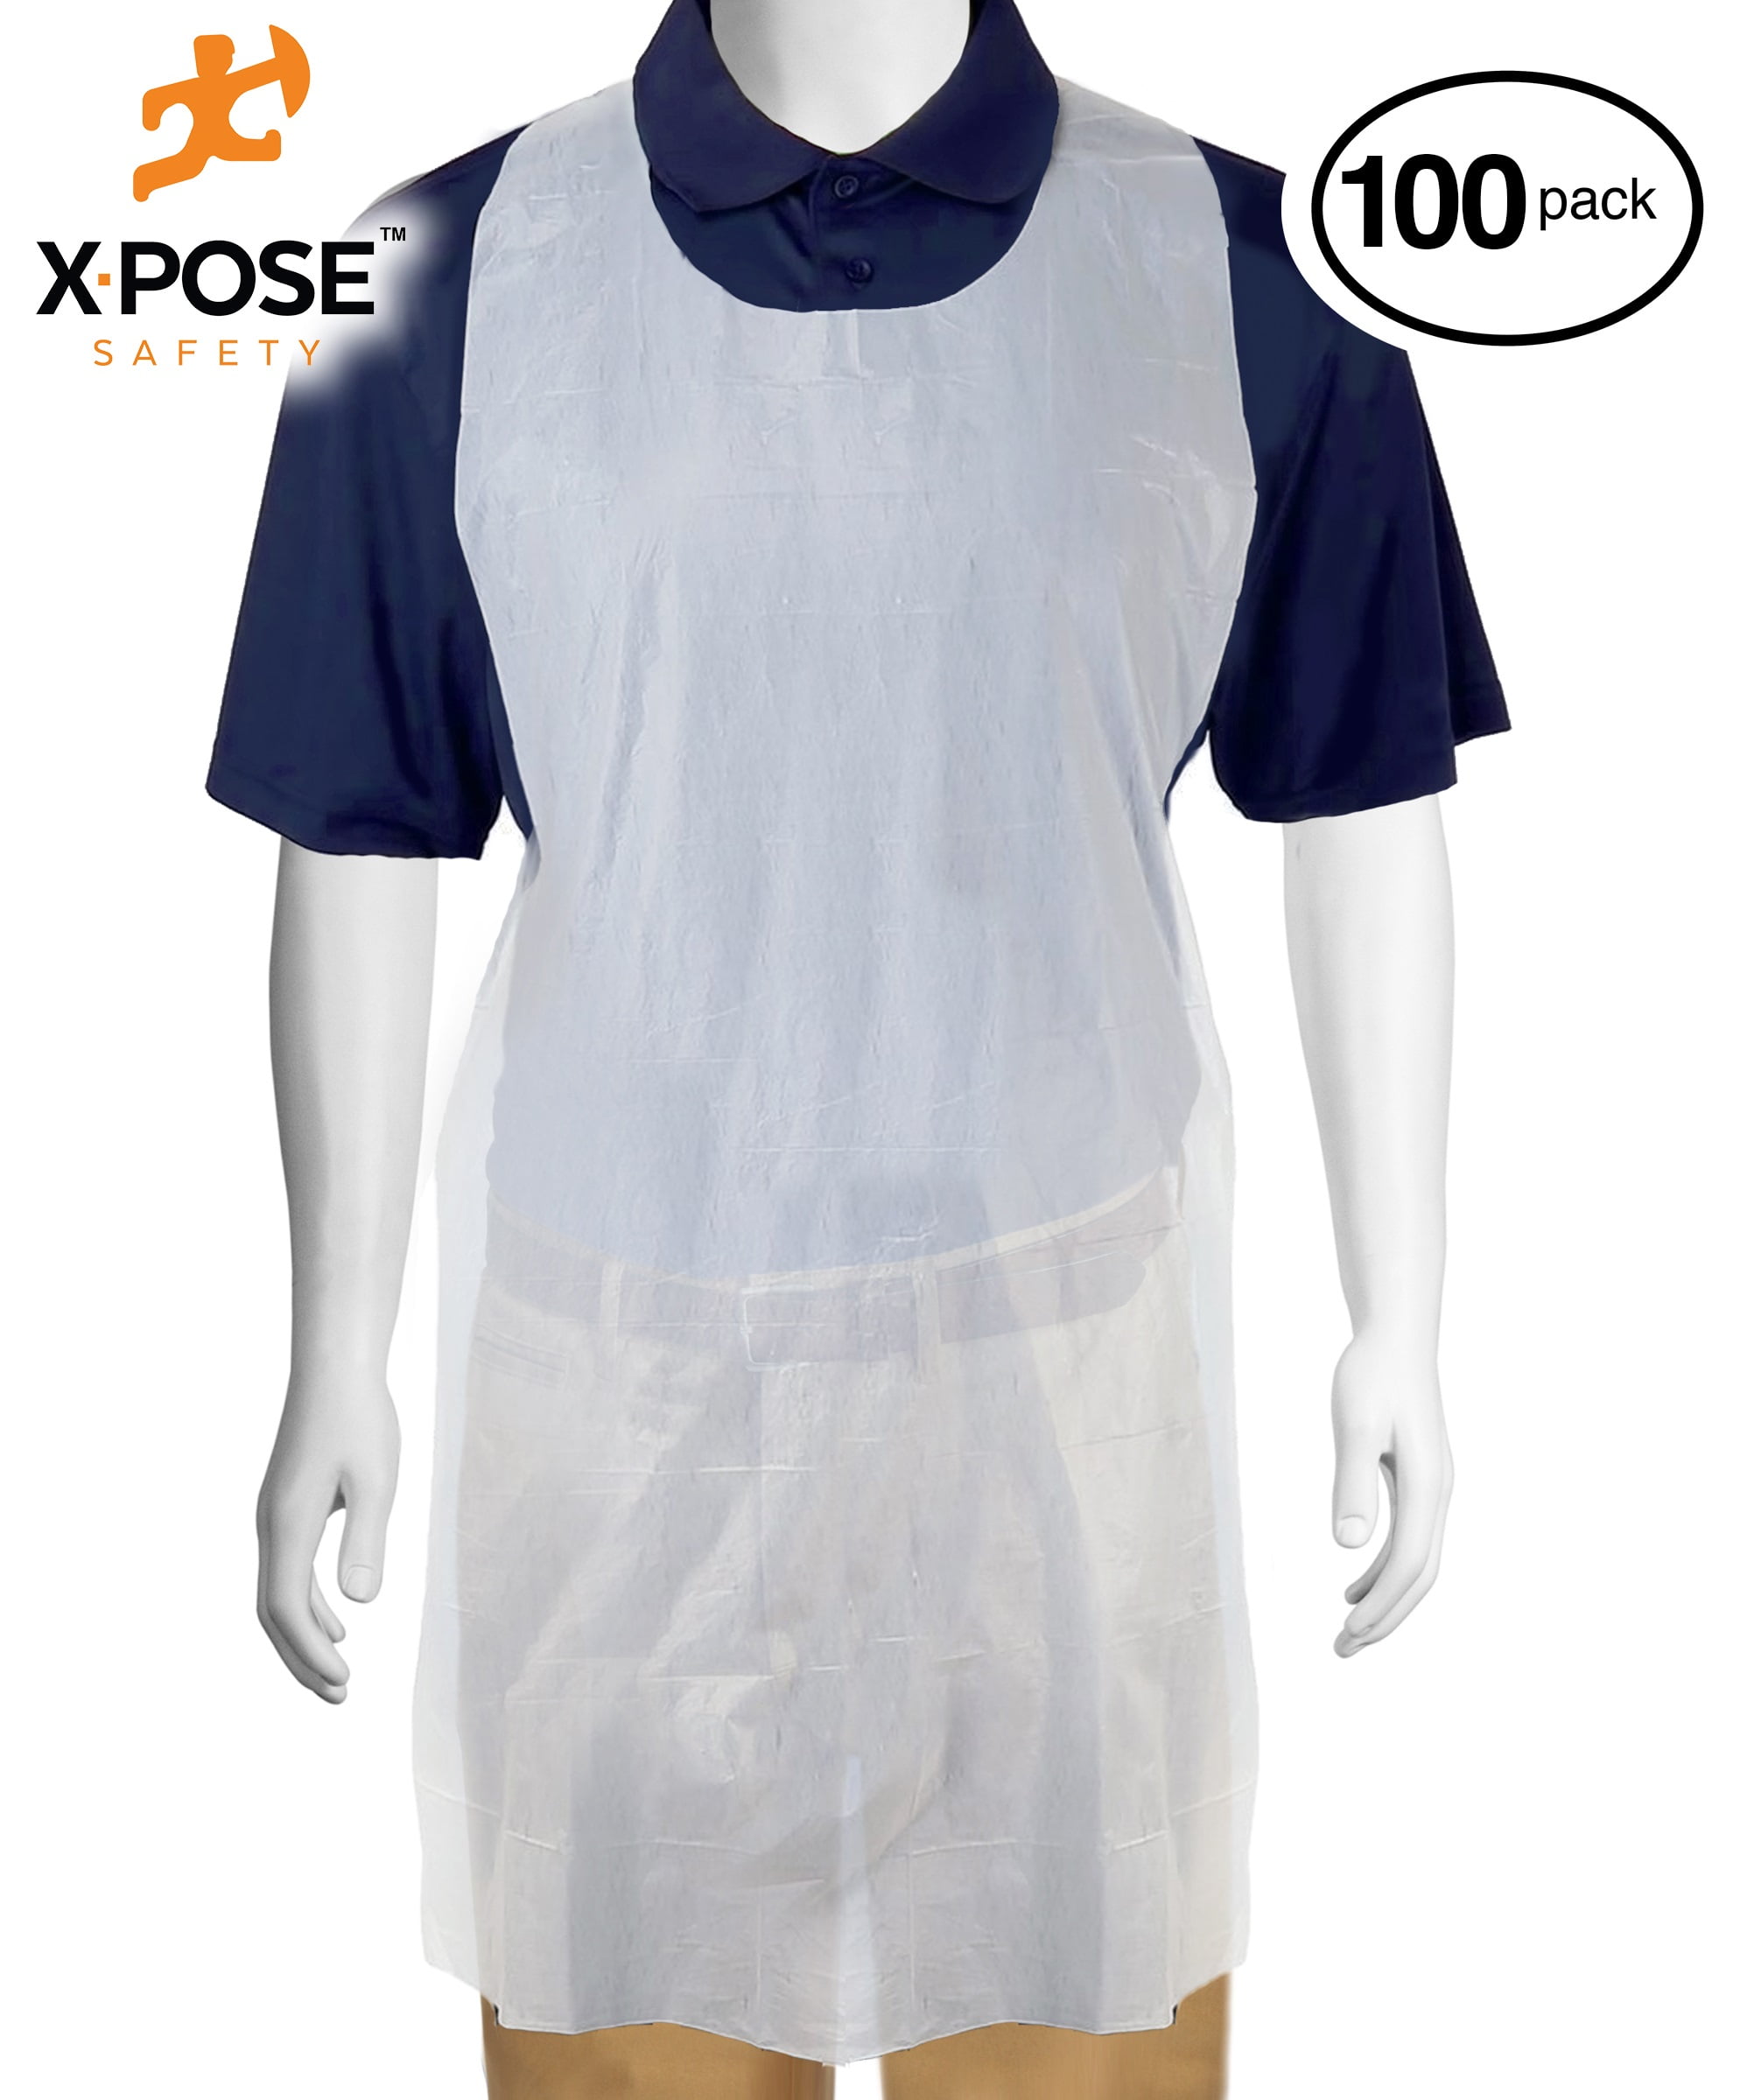 Premier Plus Coated Polypropylene Disposable Aprons, 28 inch x 36 inch, 100/Case, Size: 28 x 36, White